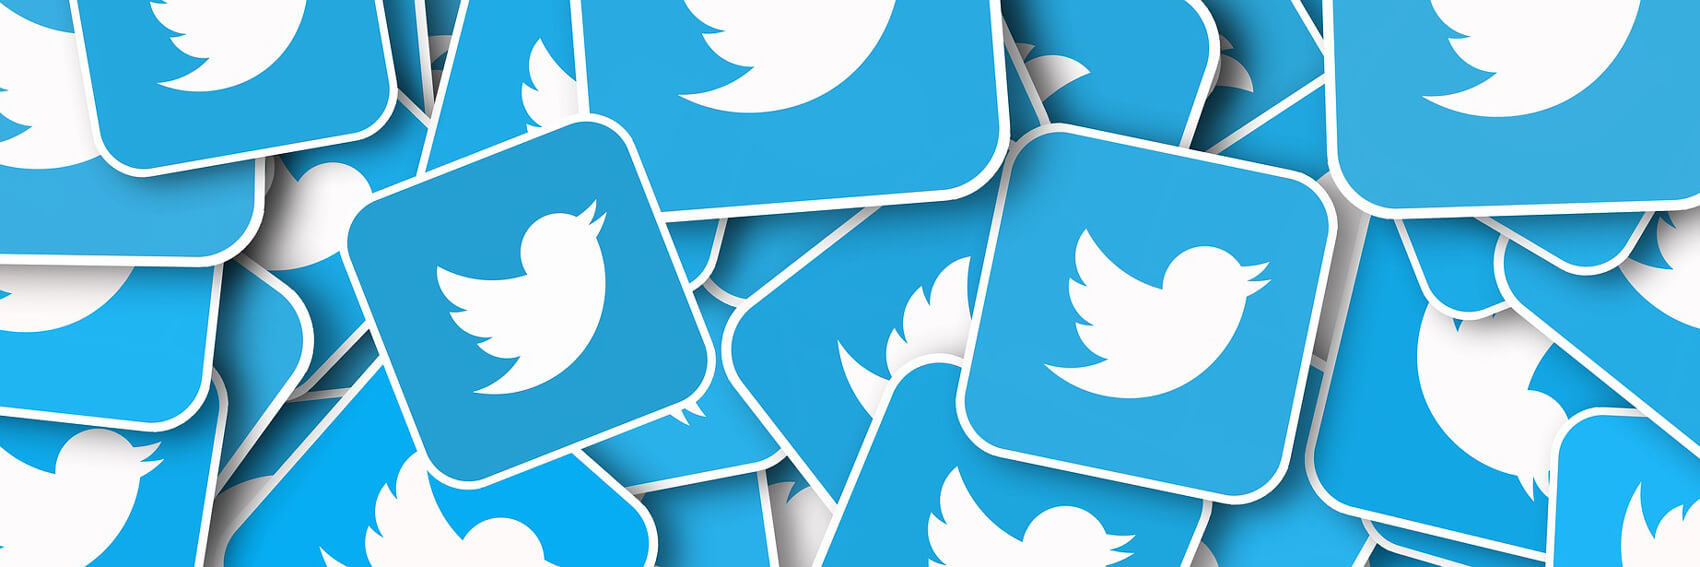 4 tips to improve your Twitter marketing strategy